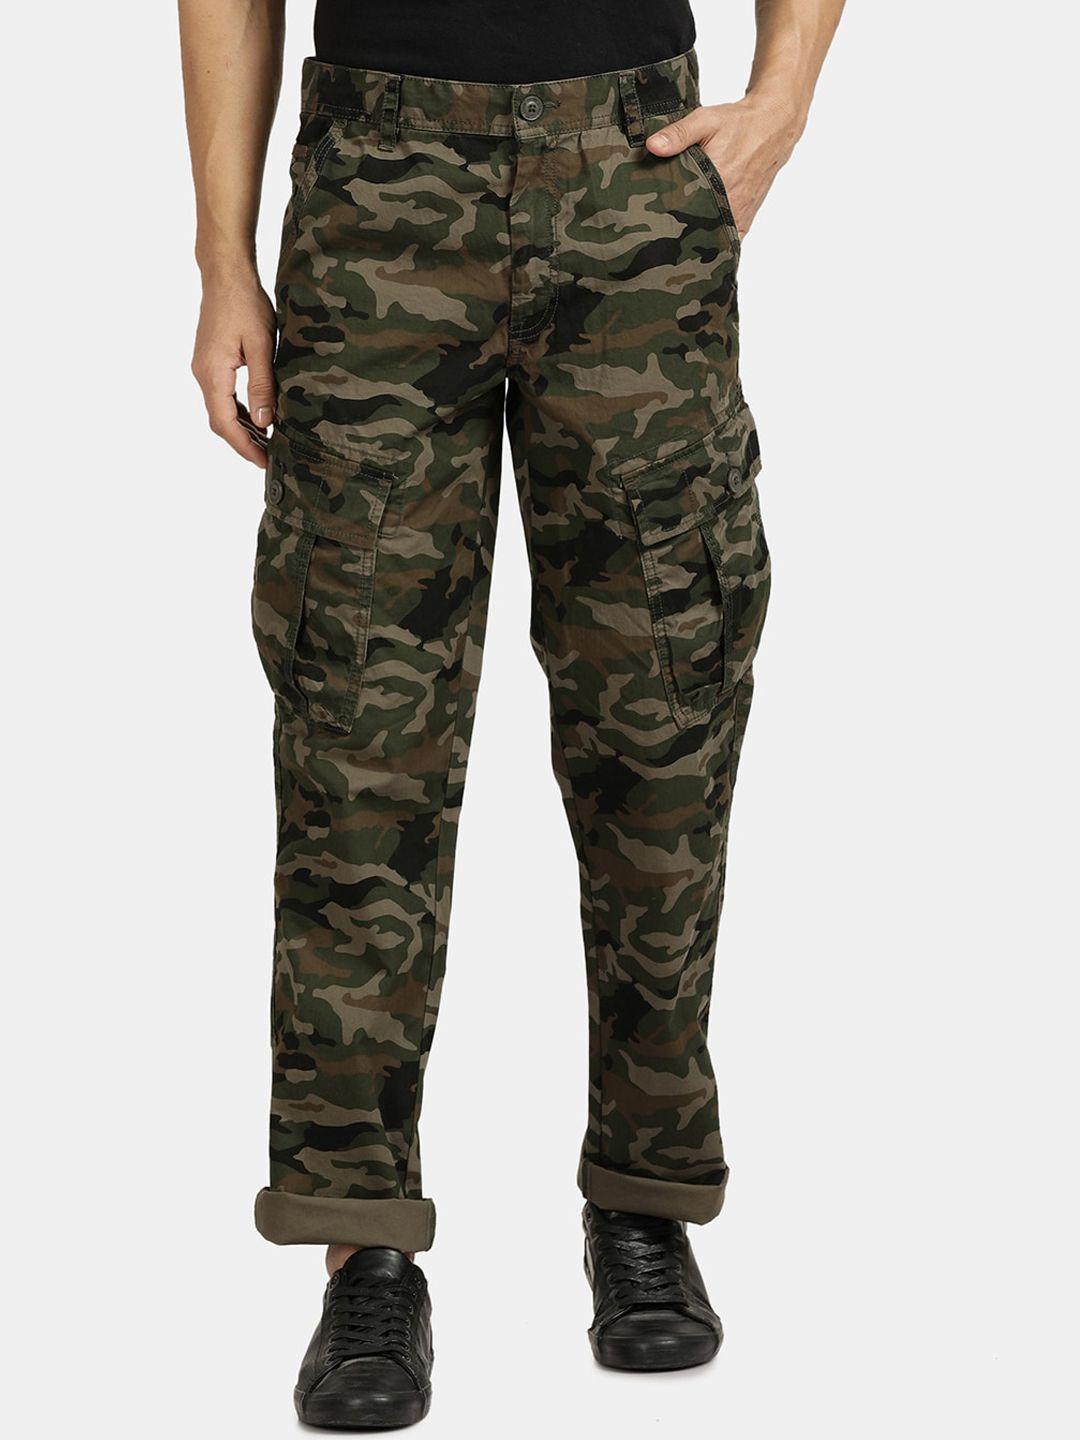 t-base-men-cotton-camouflage-printed-cargos-trousers